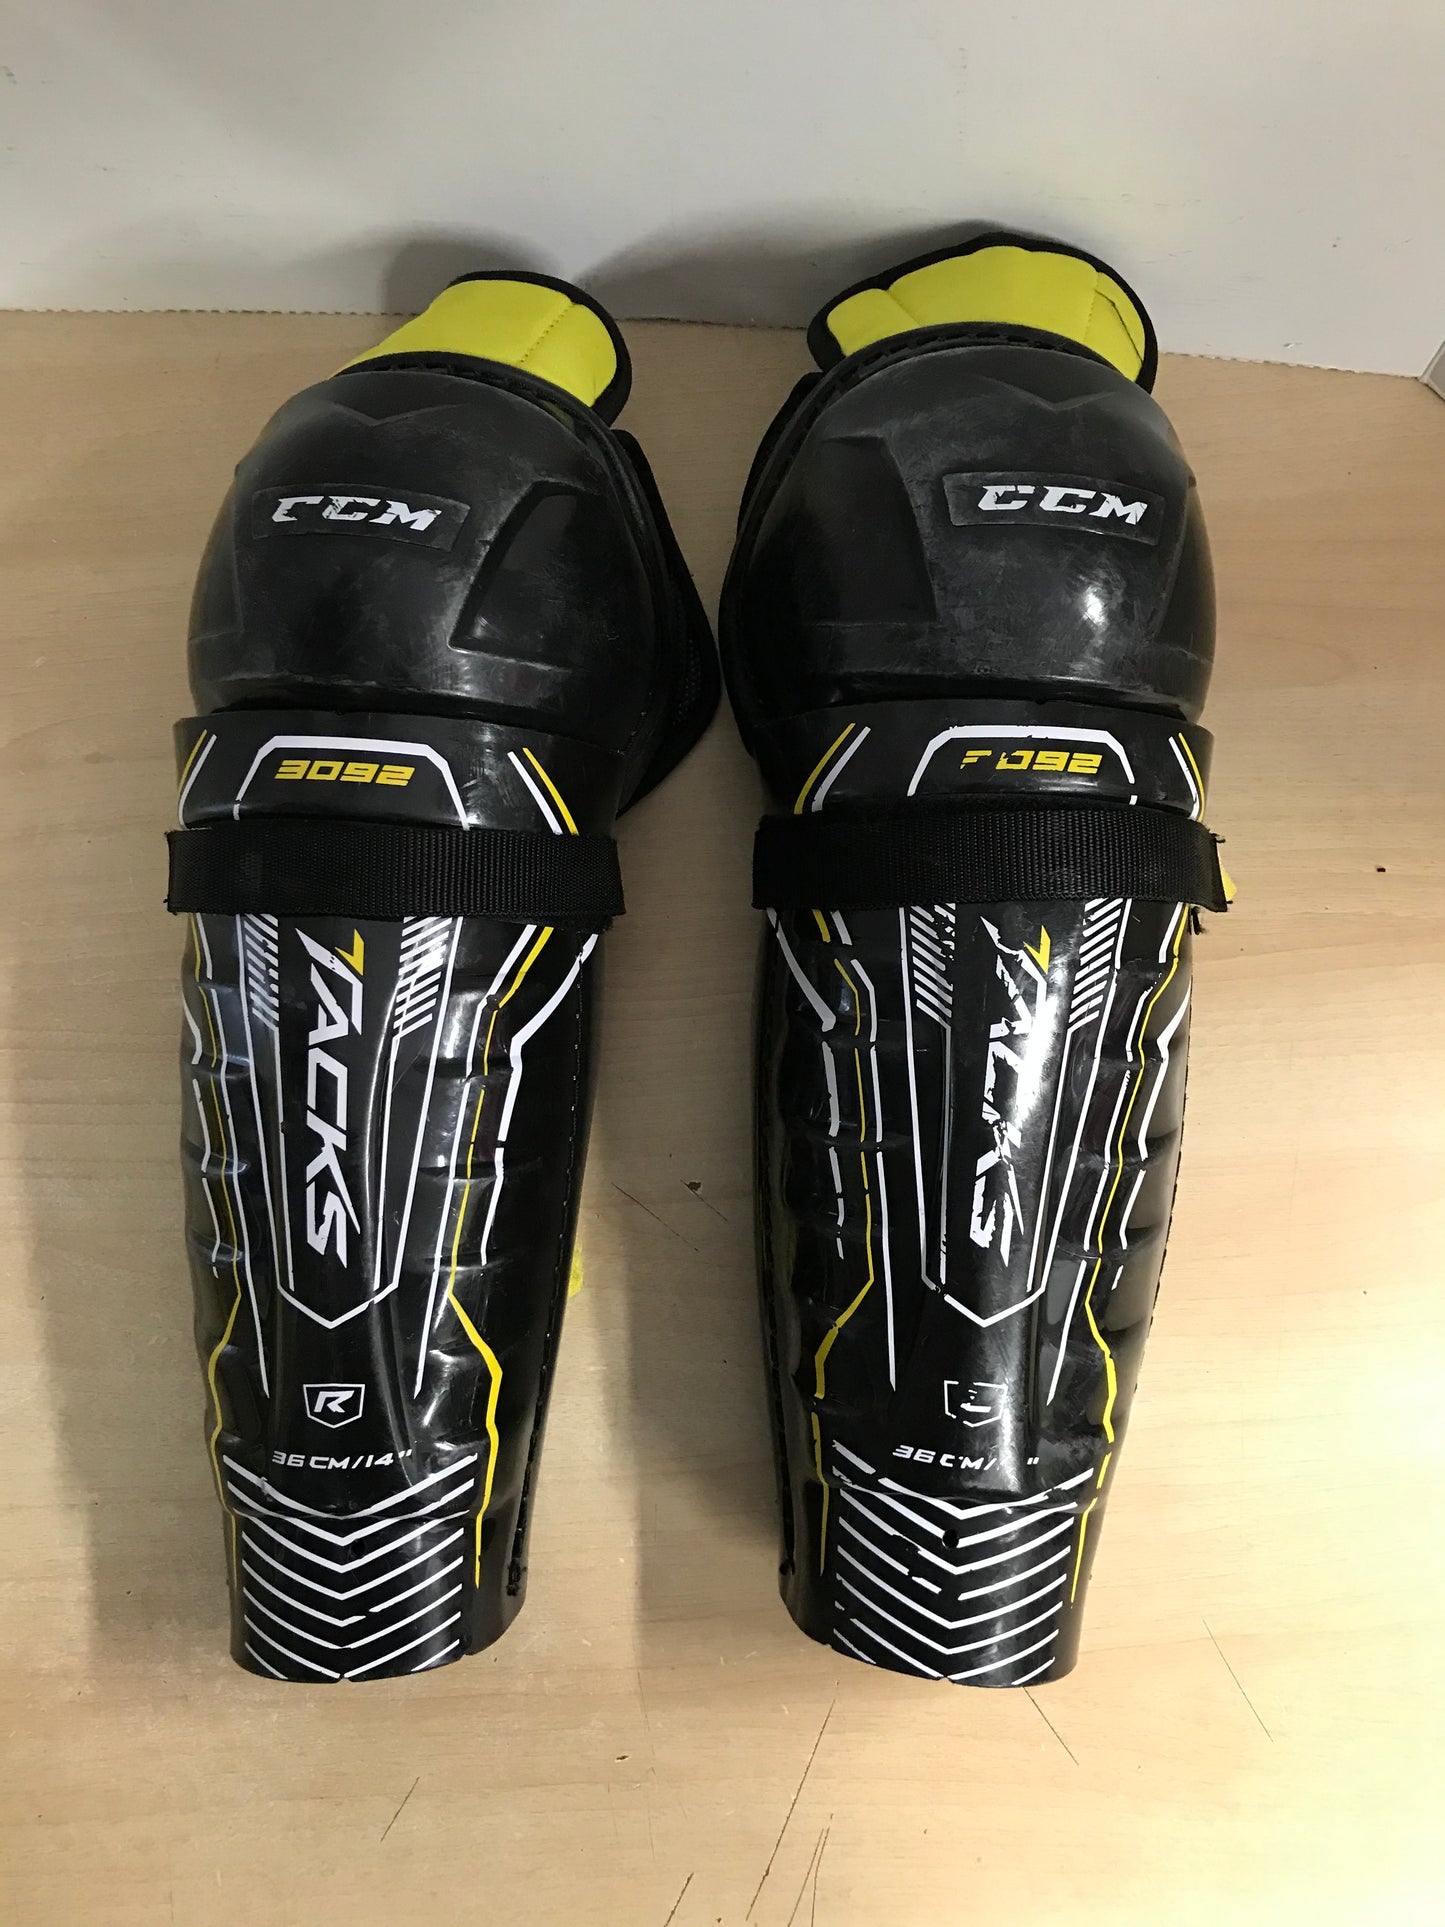 Hockey Shin Pads Men's Size 14 inch CCM Tacks 3092 Black Yellow Excellent